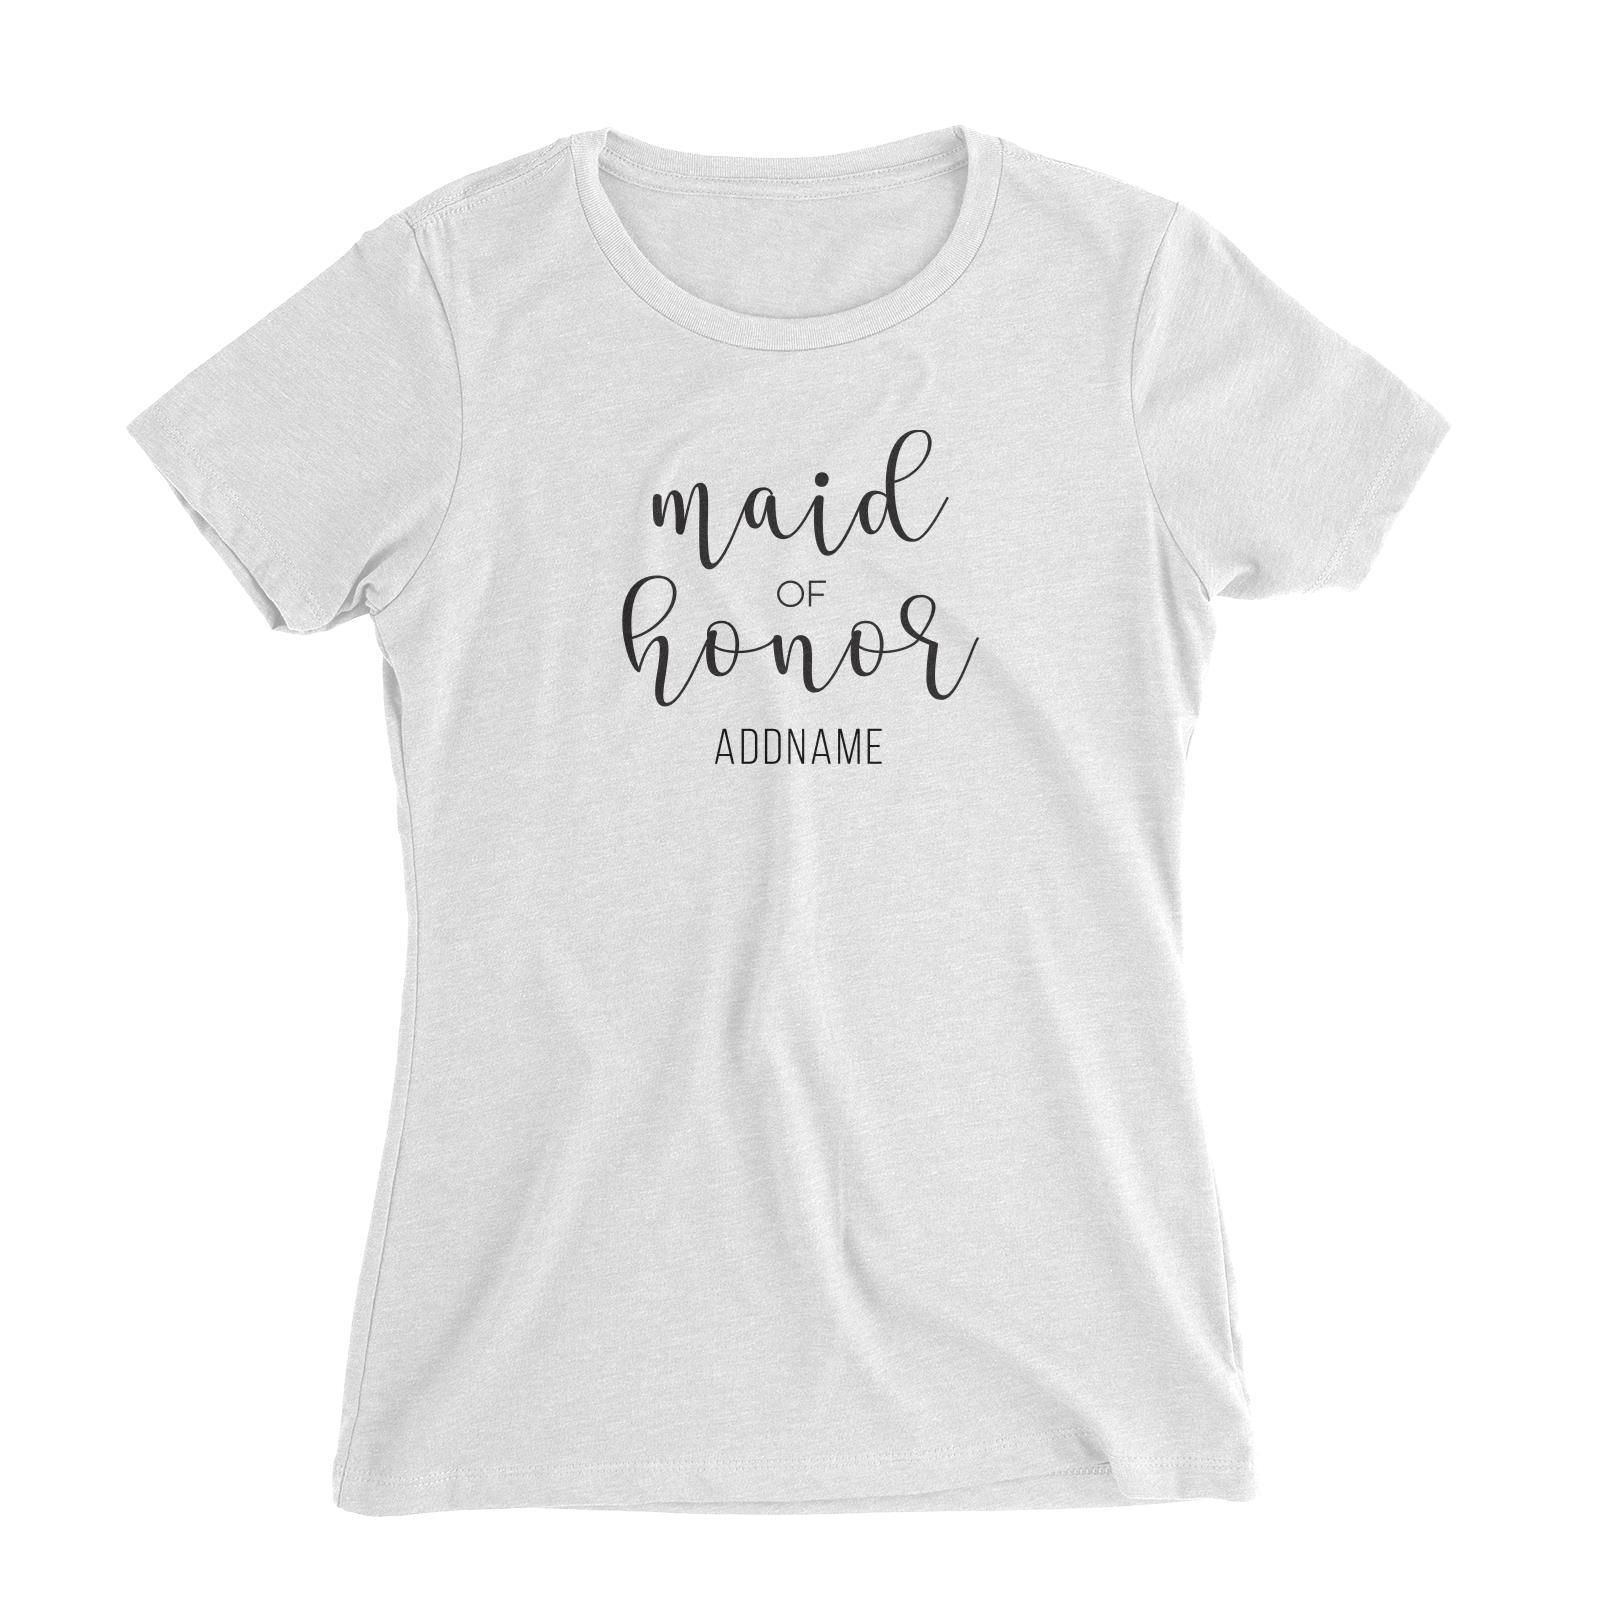 Bridesmaid Calligraphy Maid Of Honour Subtle Addname Women Slim Fit T-Shirt